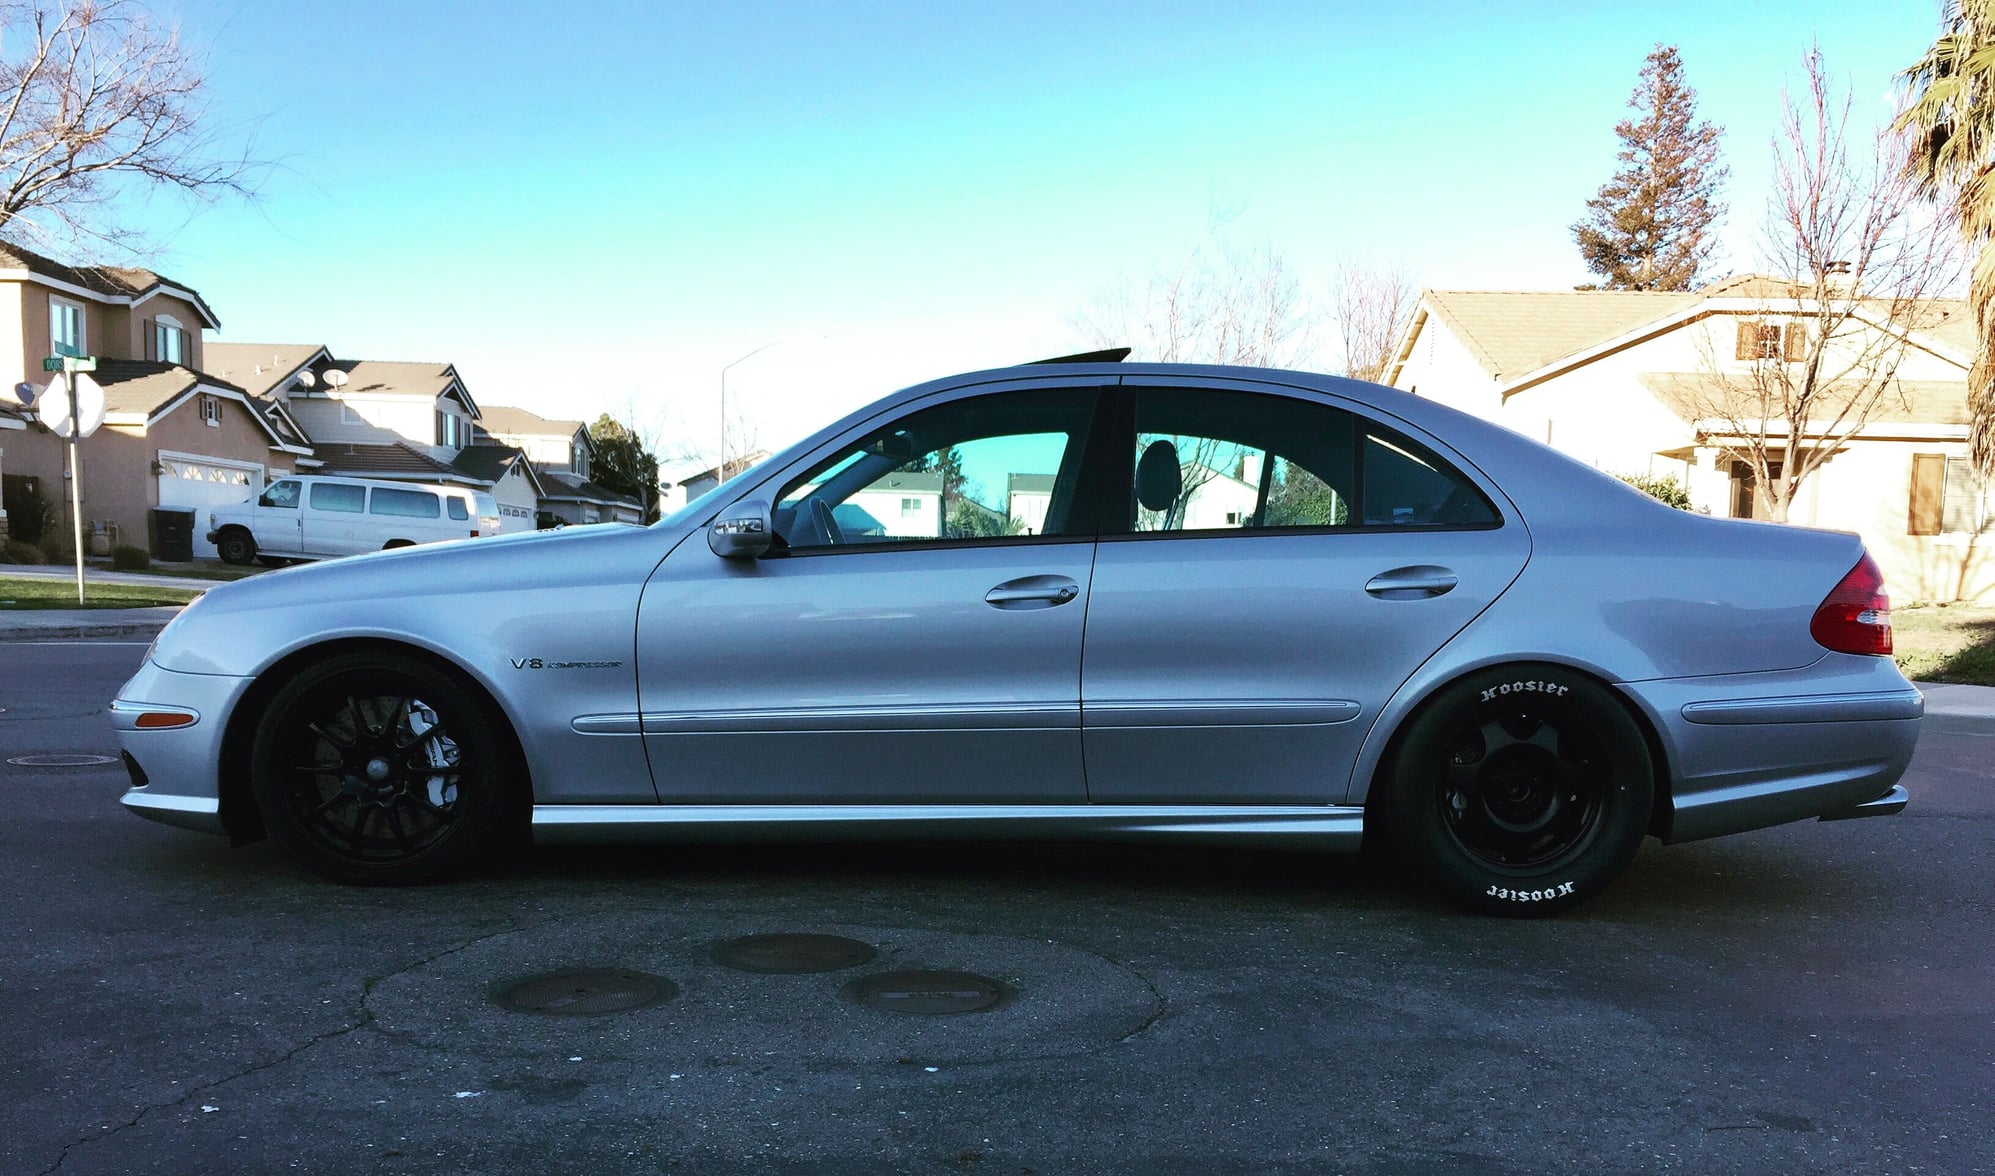 2004 Mercedes-Benz E55 AMG - 1 Owner 2004 E55 23K Miles - Used - VIN wdbuf76jx4a425023 - 23,916 Miles - 8 cyl - 2WD - Automatic - Sedan - Silver - Tracy, CA 95391, United States